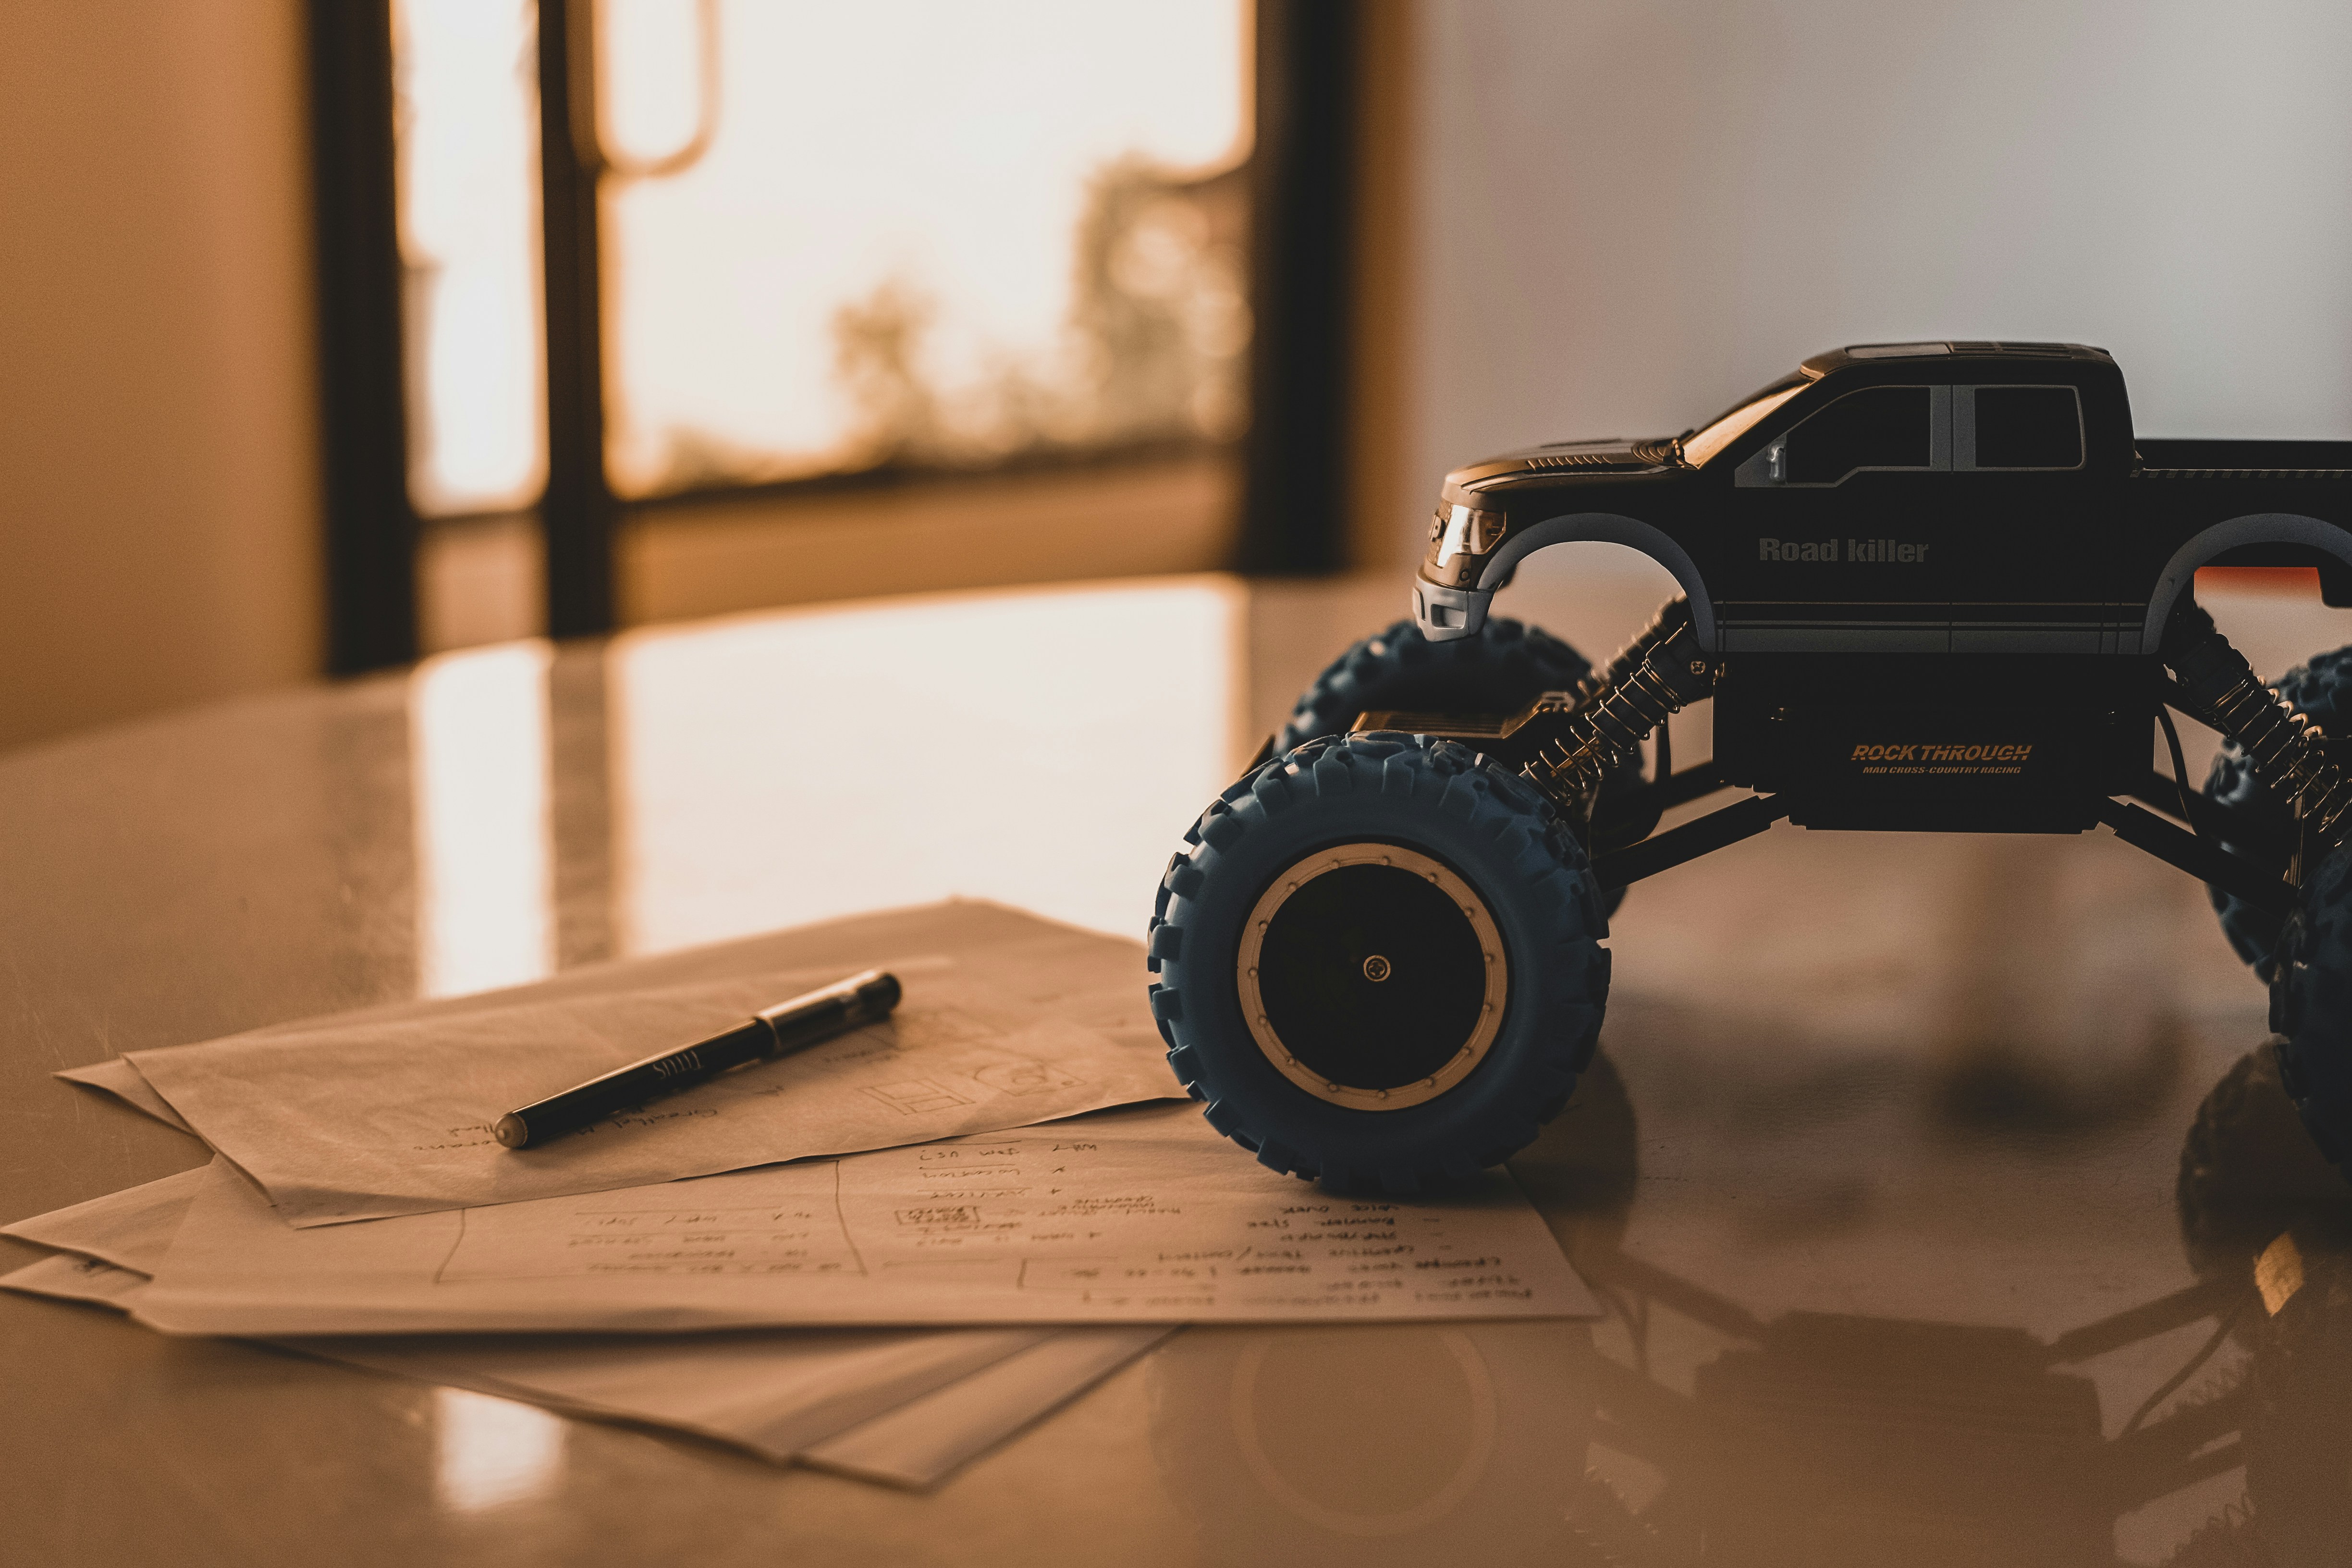 I was inspired and took a photo during my day job. My eyes are tired working in my computer. To de-stress, I then played a toy truck which is owned by my workmate and then poof, i thought of it as a good subject. :) Please see also the part 2 on this link. https://unsplash.com/photos/fkYSKFbpERo/download?force=true